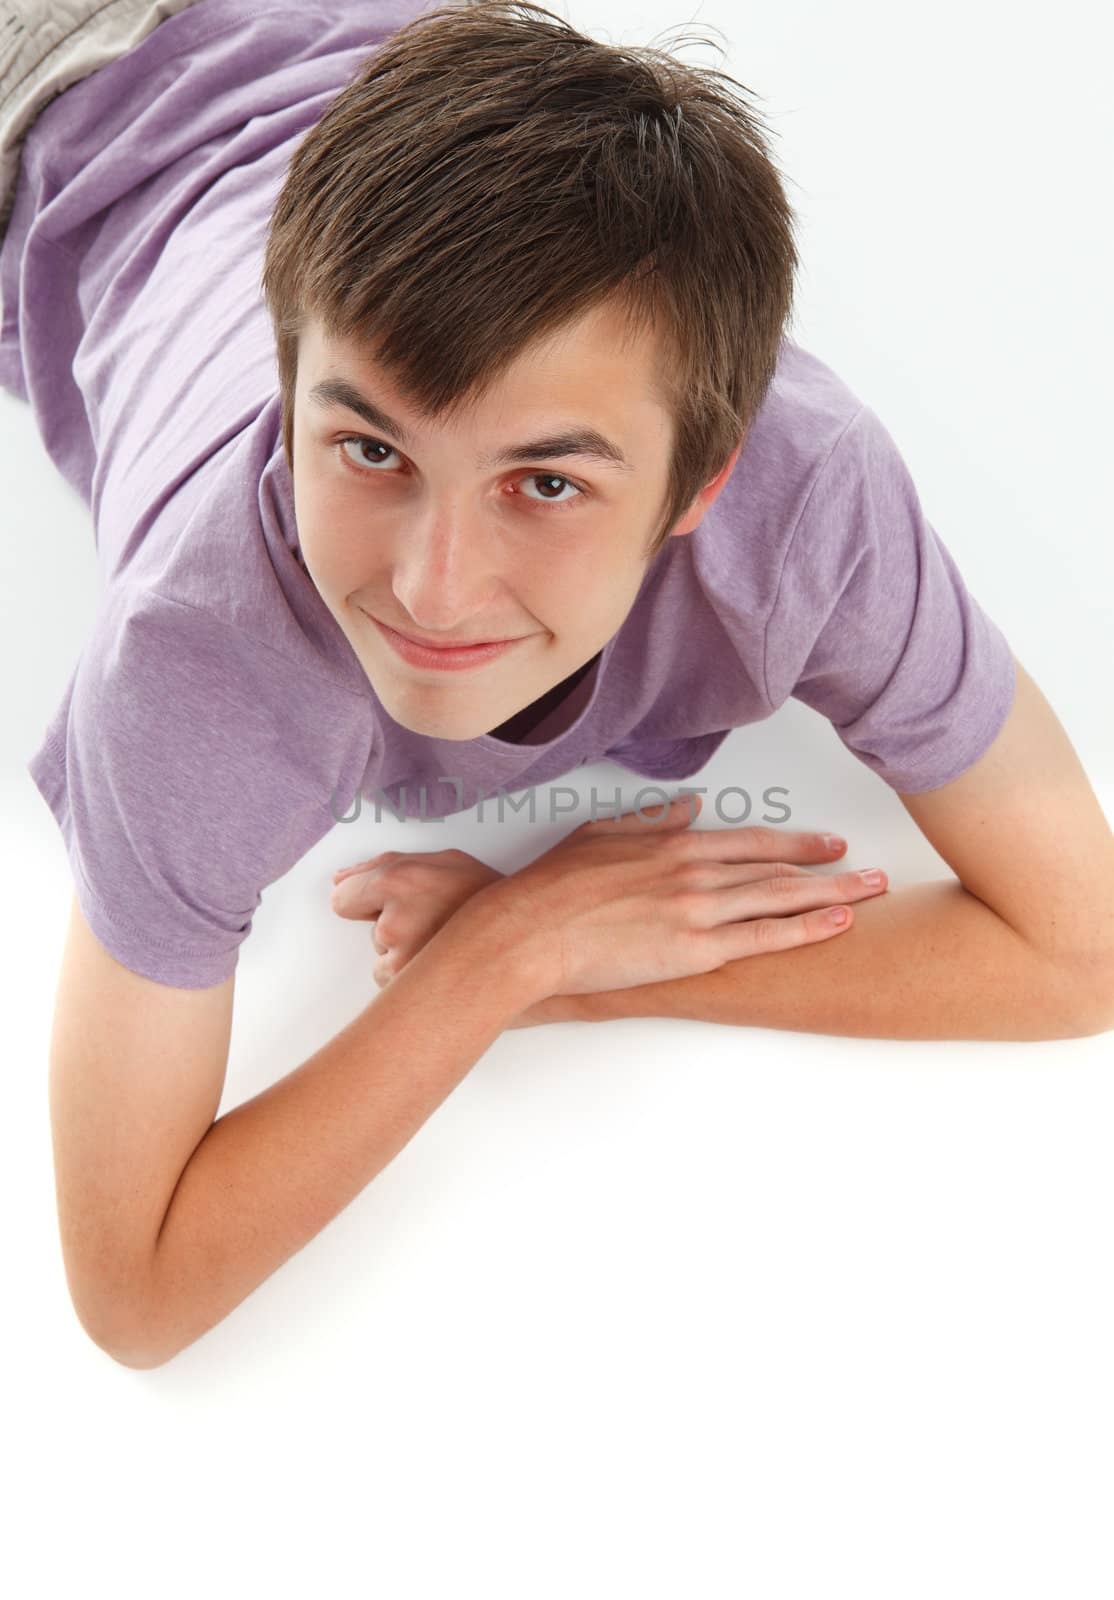 A smiling relaxed boy in a purple t-shirt is resting lying on stomach and looking up.  White background.